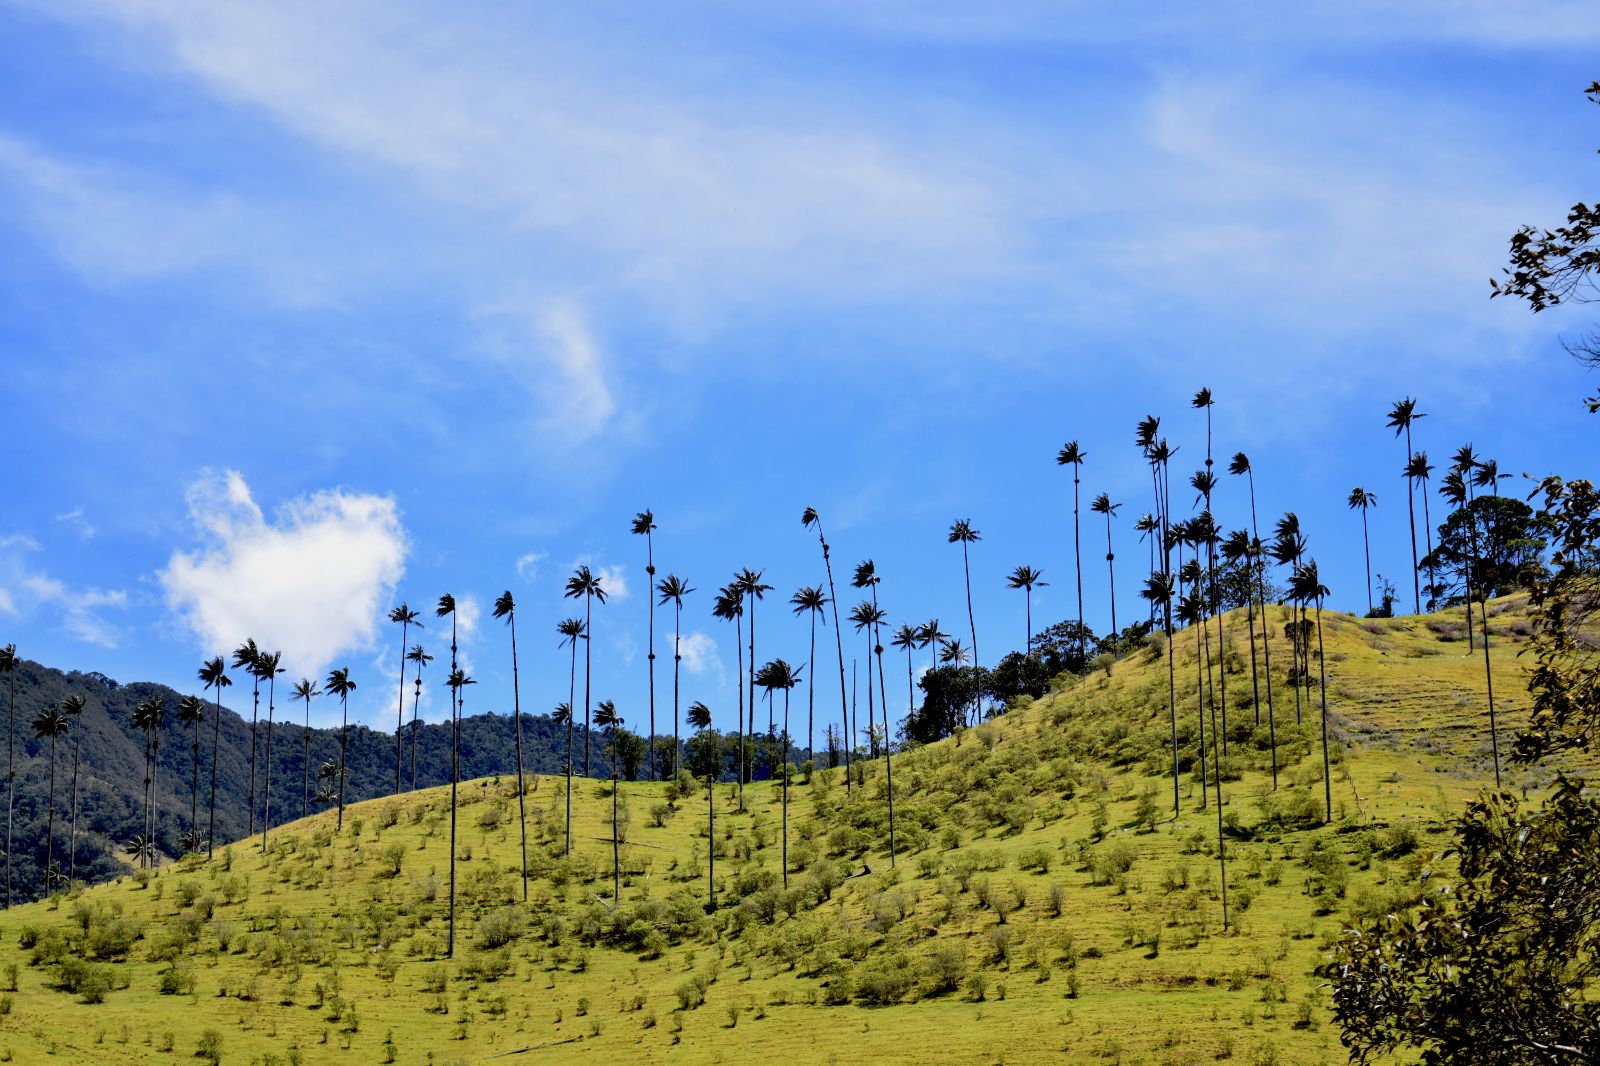 Cocora Valley with towering trees in the coffee region, Colombia